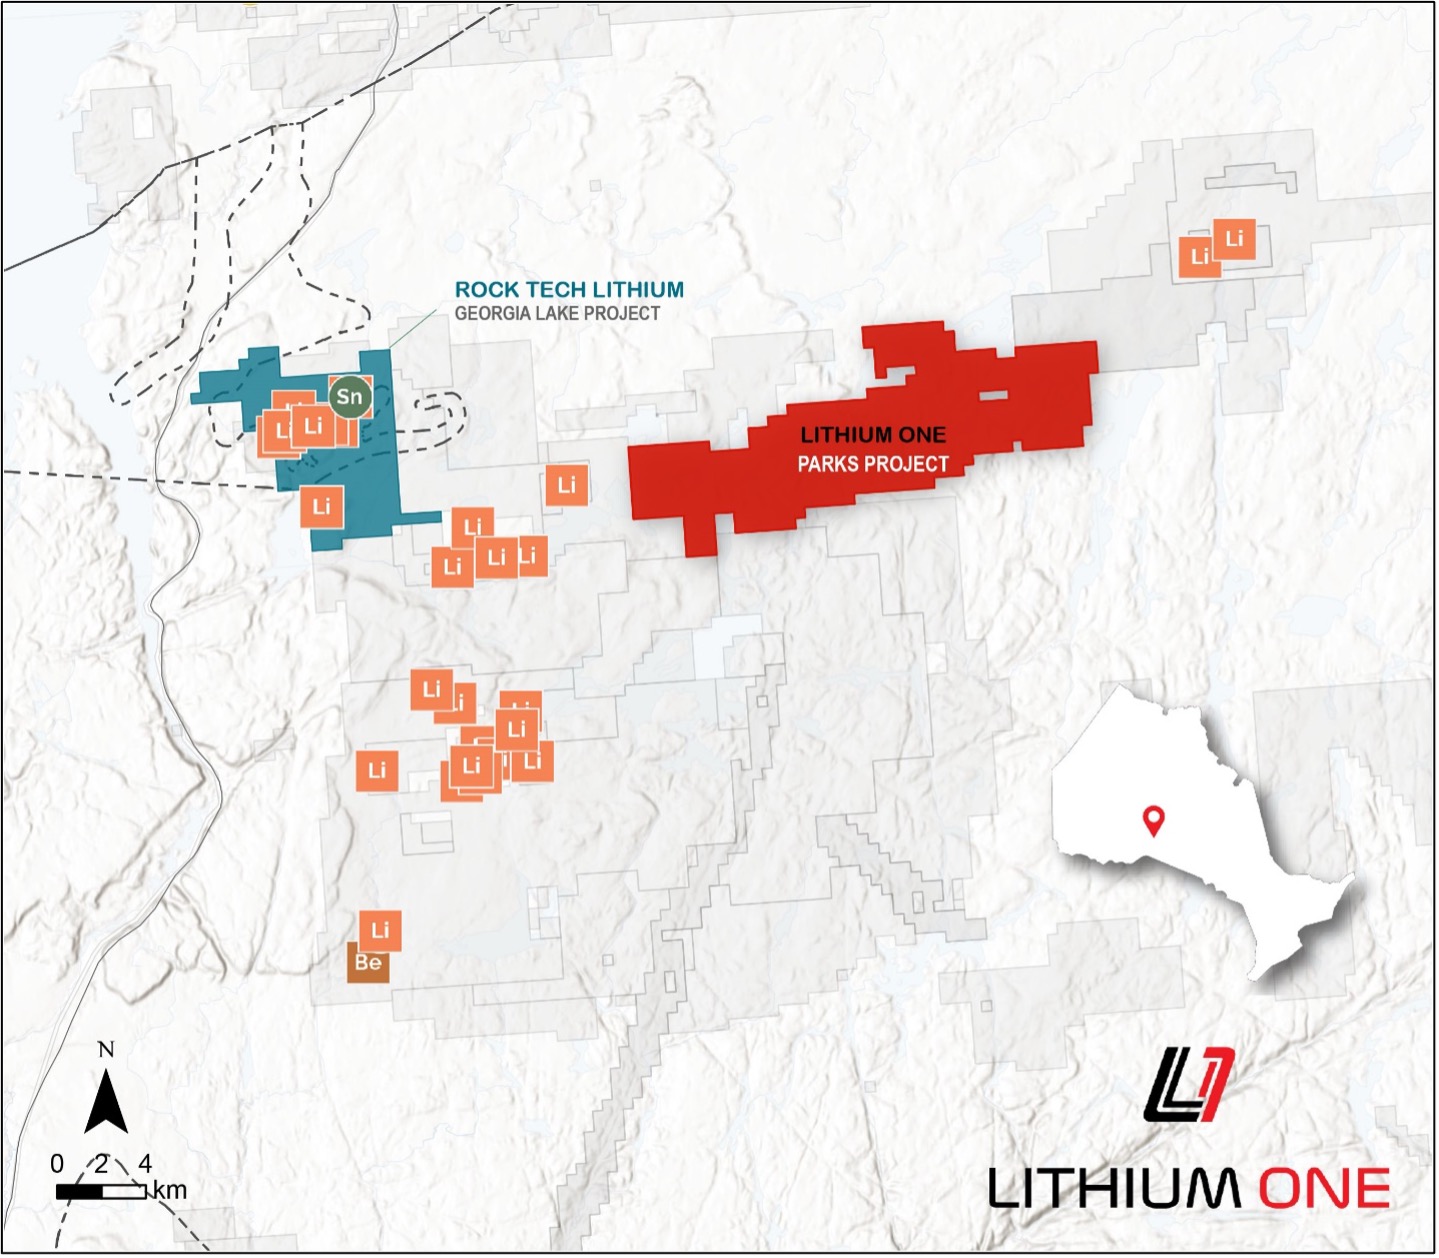 Figure 3. Parks Lithium property map showing the location of lithium showings and Rock Tech Lithium’s Georgia Lake Project in the Thunder Bay Mining Division in northwest Ontario.